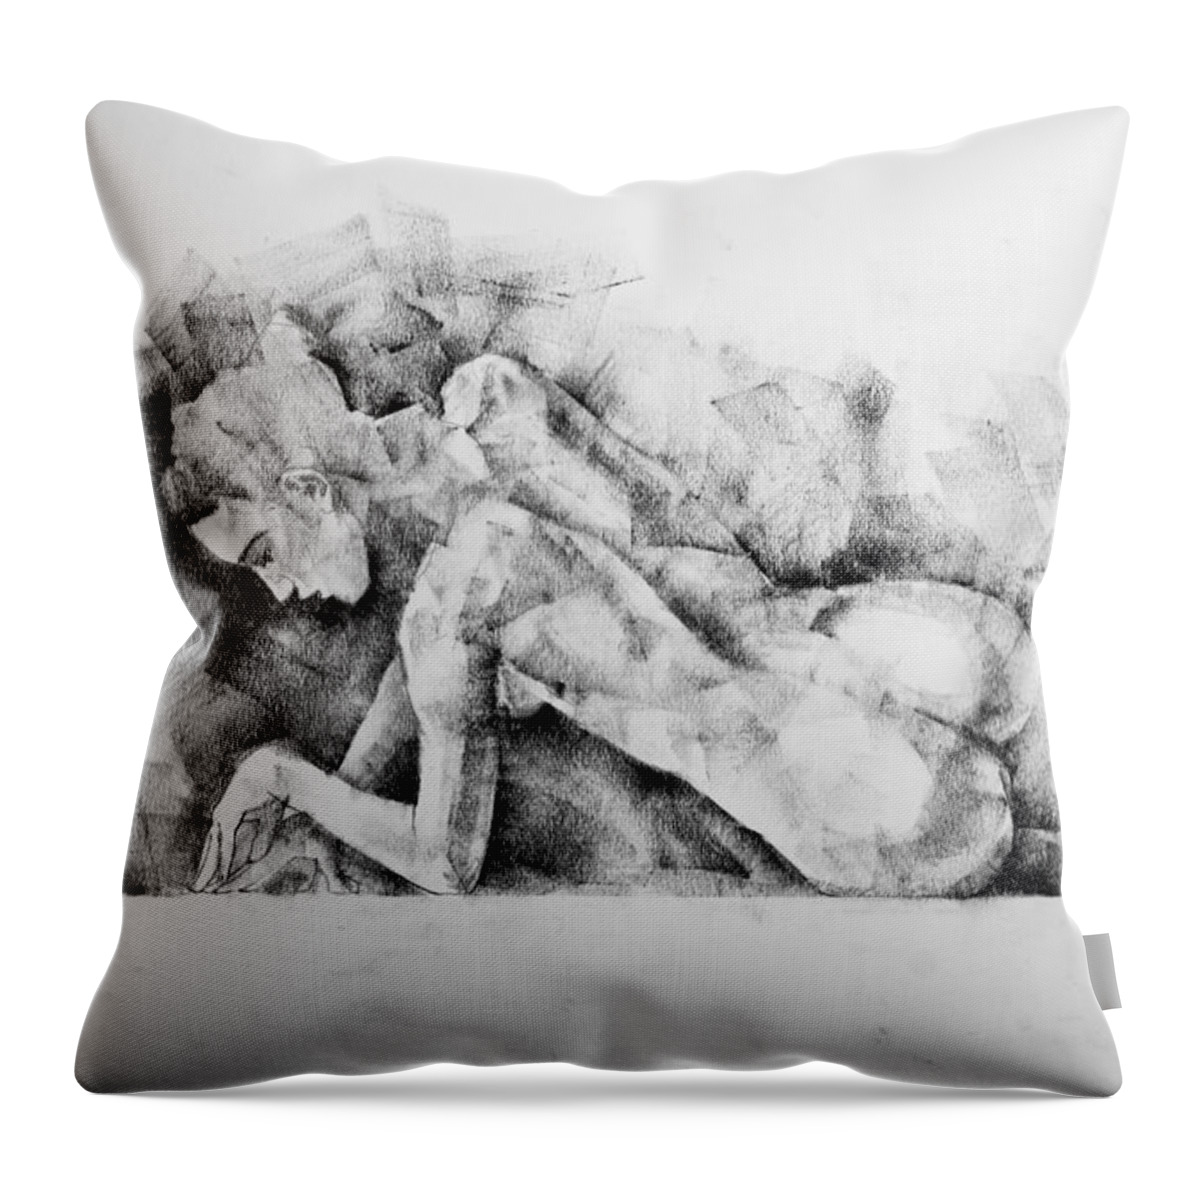 Erotic Throw Pillow featuring the drawing Page 7 by Dimitar Hristov